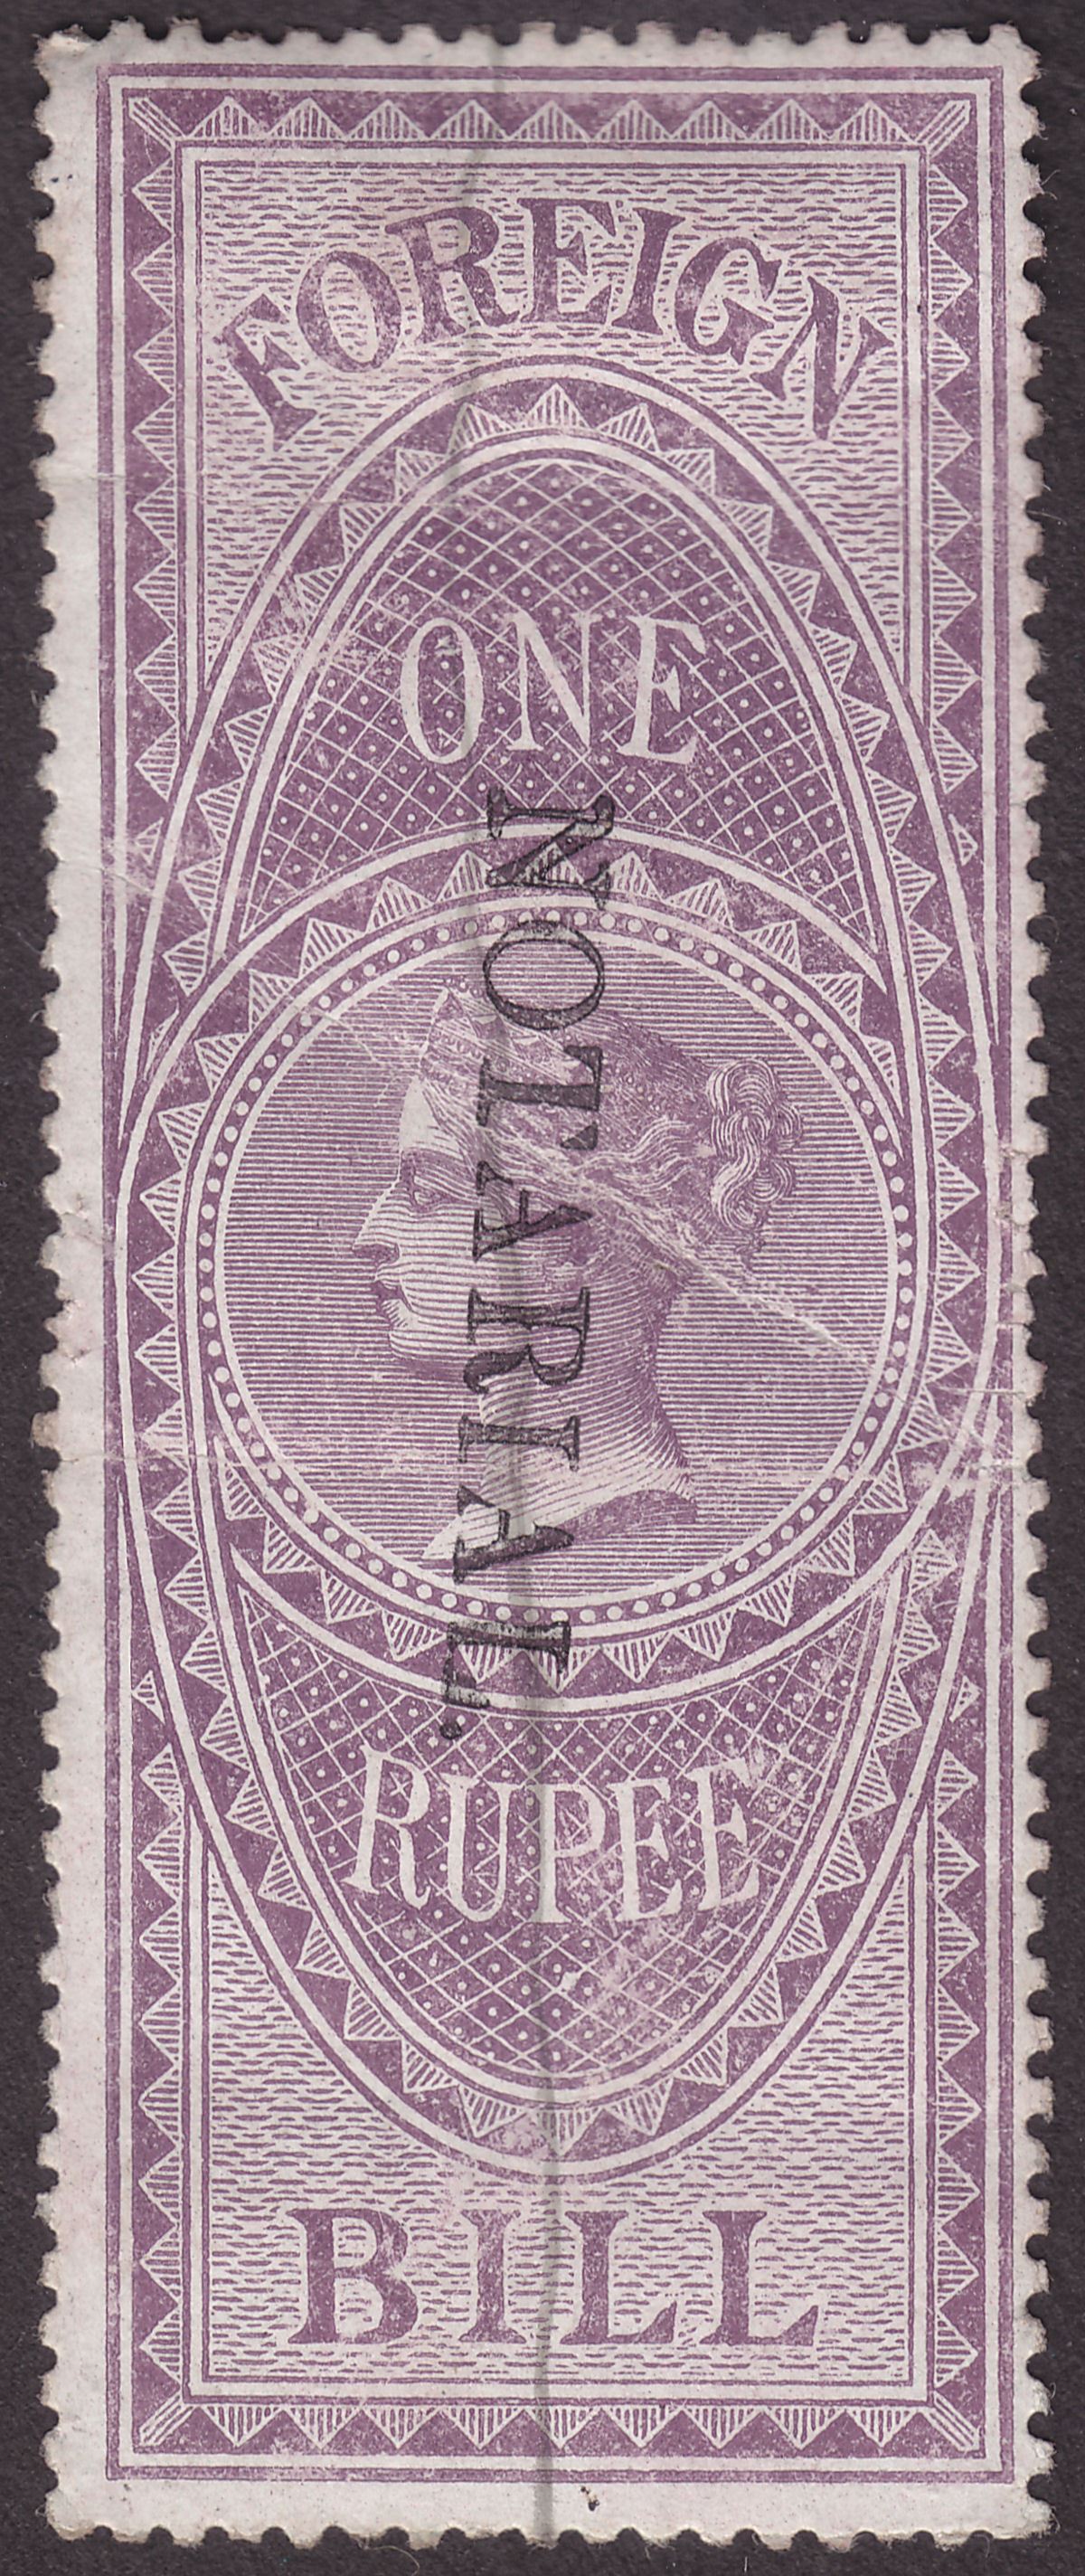 India 1879 QV Revenue Notarial Overprint 23mm Down Foreign Bill 1r Used BF10bB